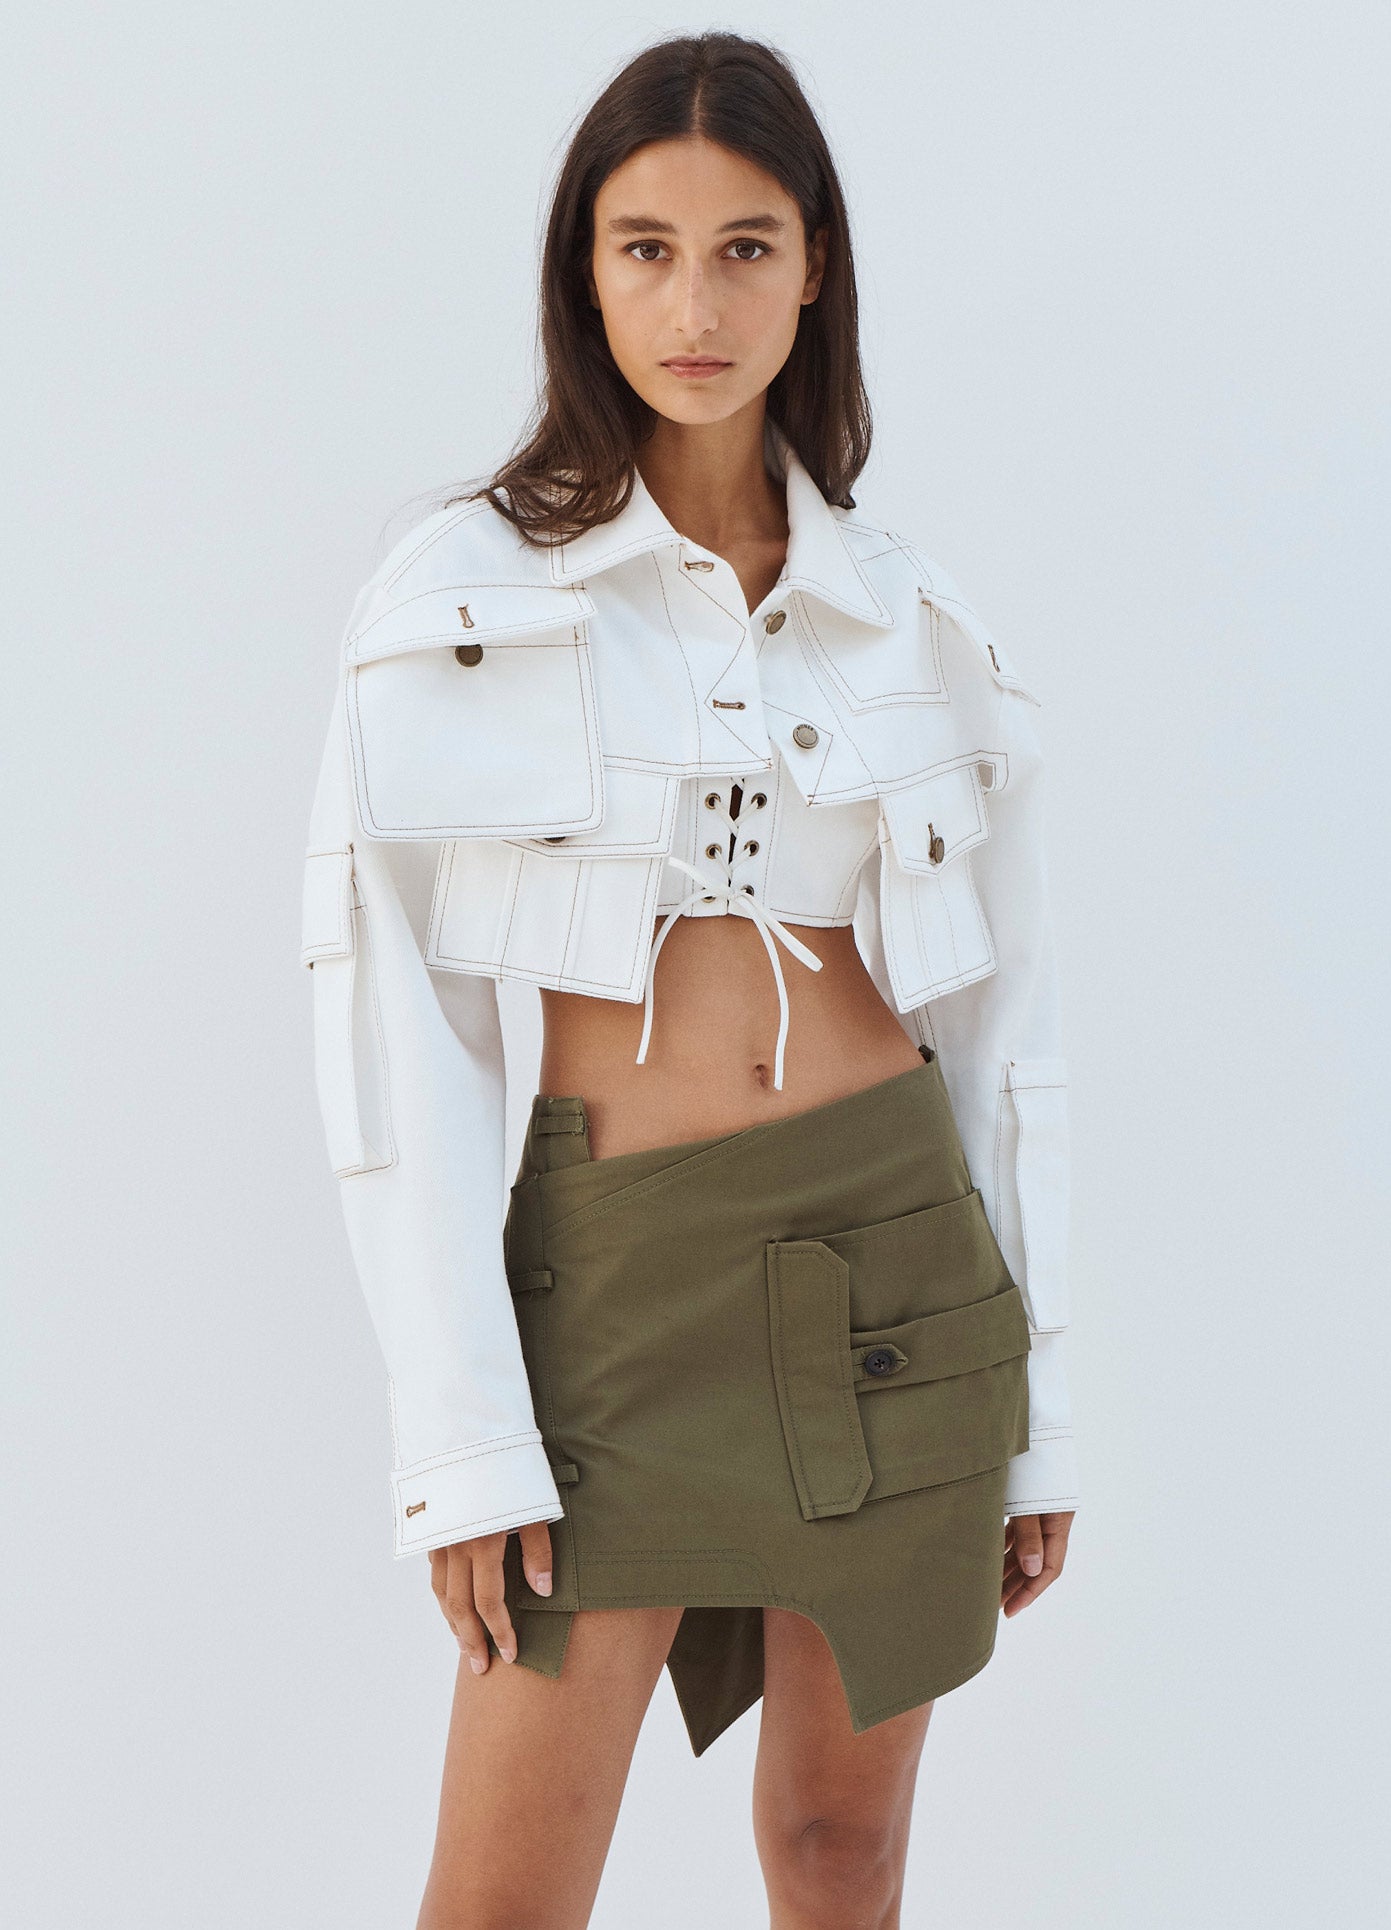 MONSE Deconstructed Trouser Mini Skirt with Pockets in Olive Front View 2